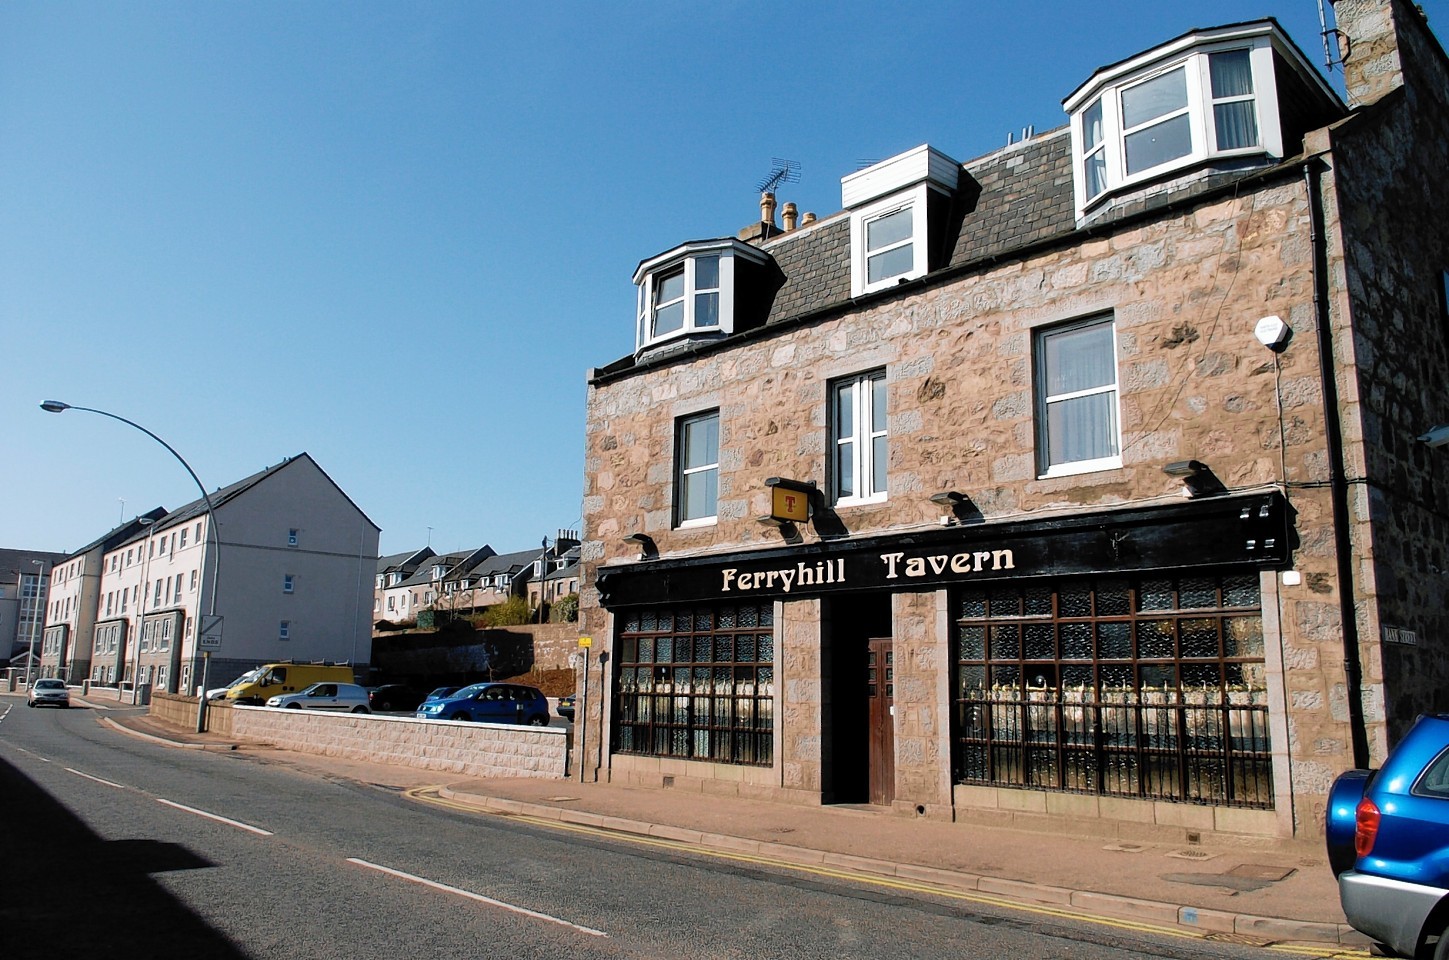 Papa John's has been given planning permission to convert the former Ferryhill Tavern into a pizza takeway.